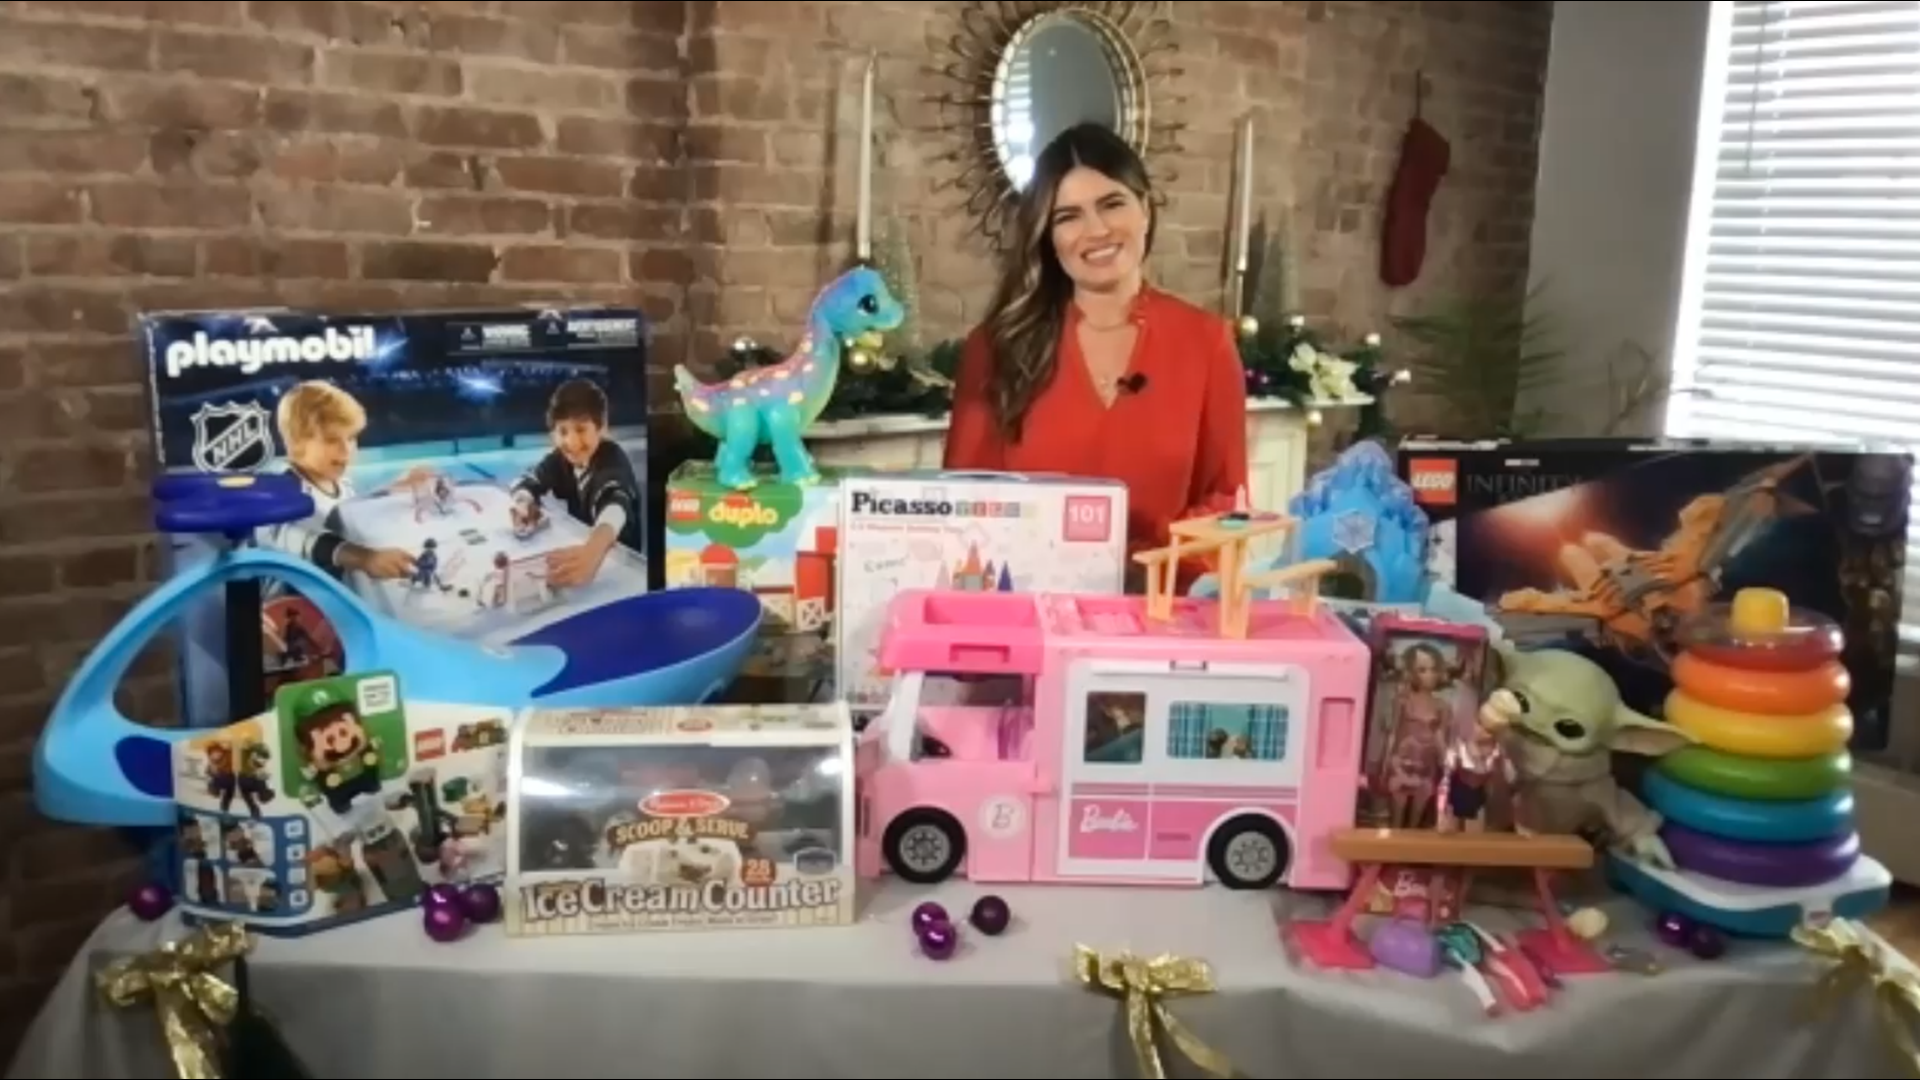 Parents can relax this holiday season. Zulily's toy experts curated a list of this season's top toys for its 2021 Toy Index. Sponsored by Zulily.